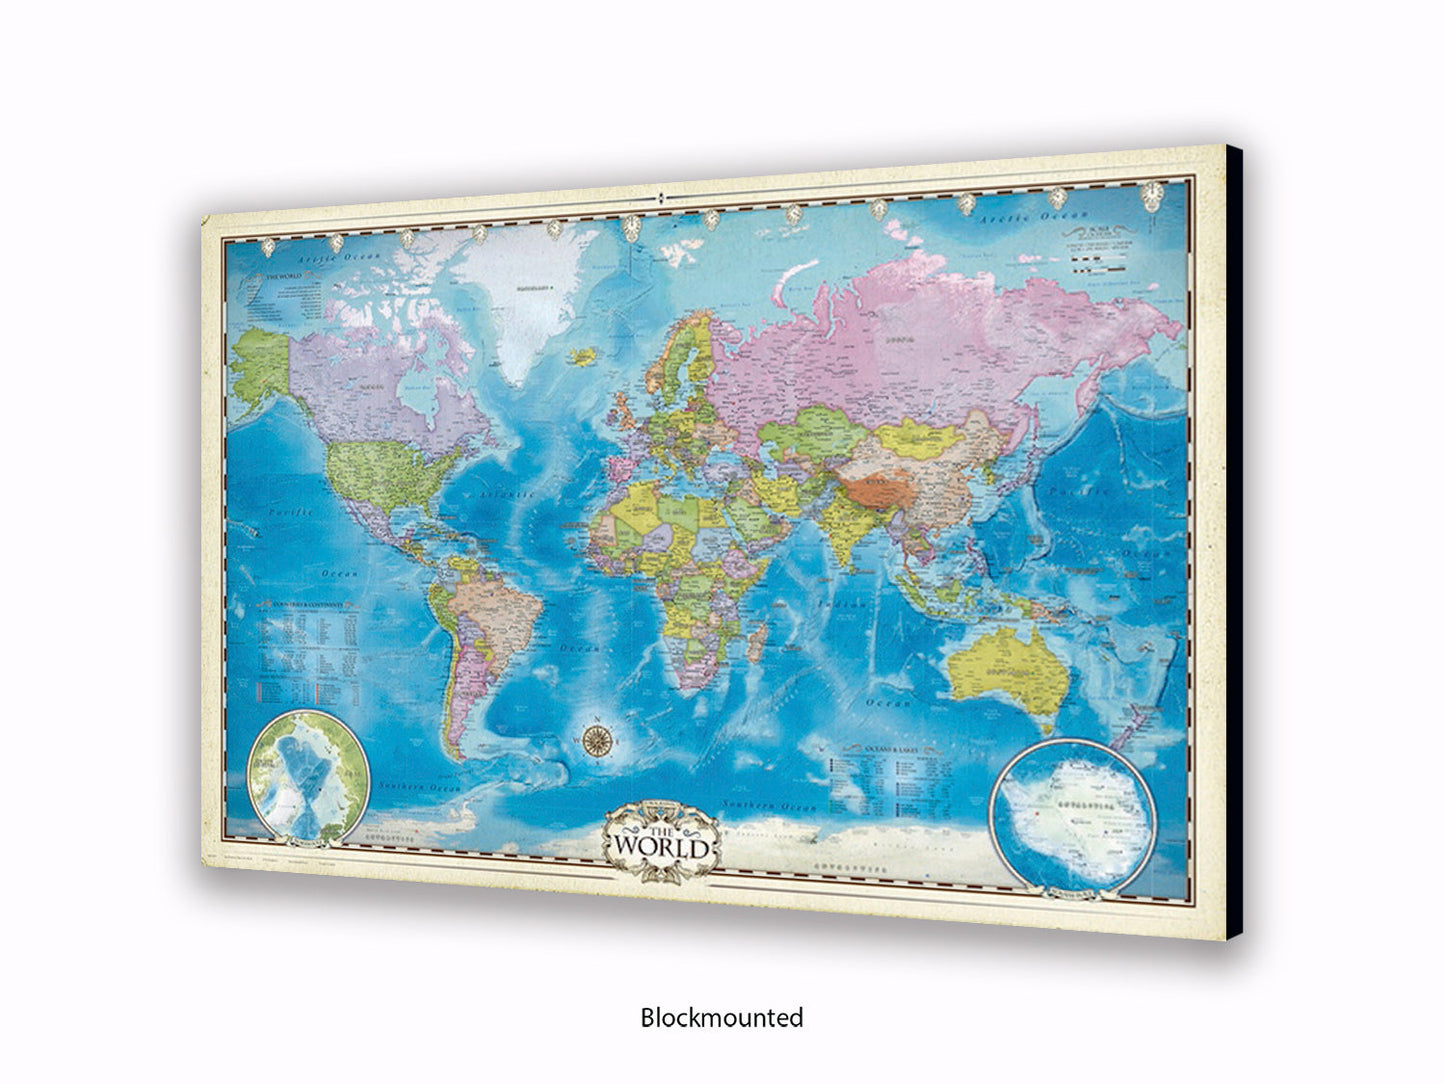 The World Political Map Poster